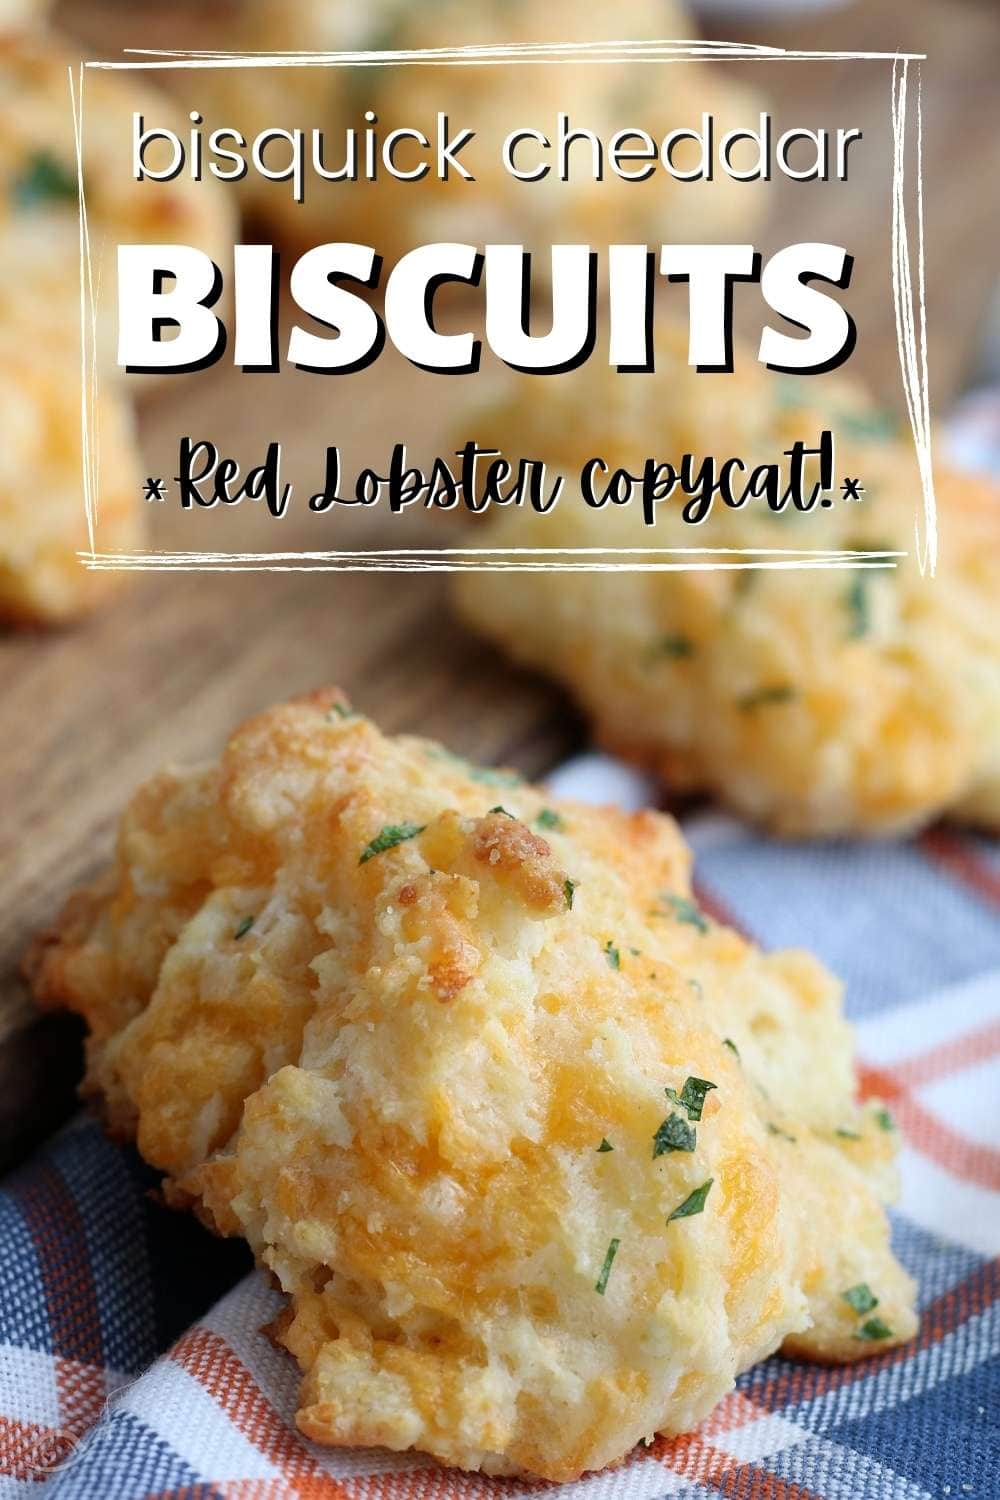 Closeup view of cheddar biscuits made with Bisquick with text overlay.